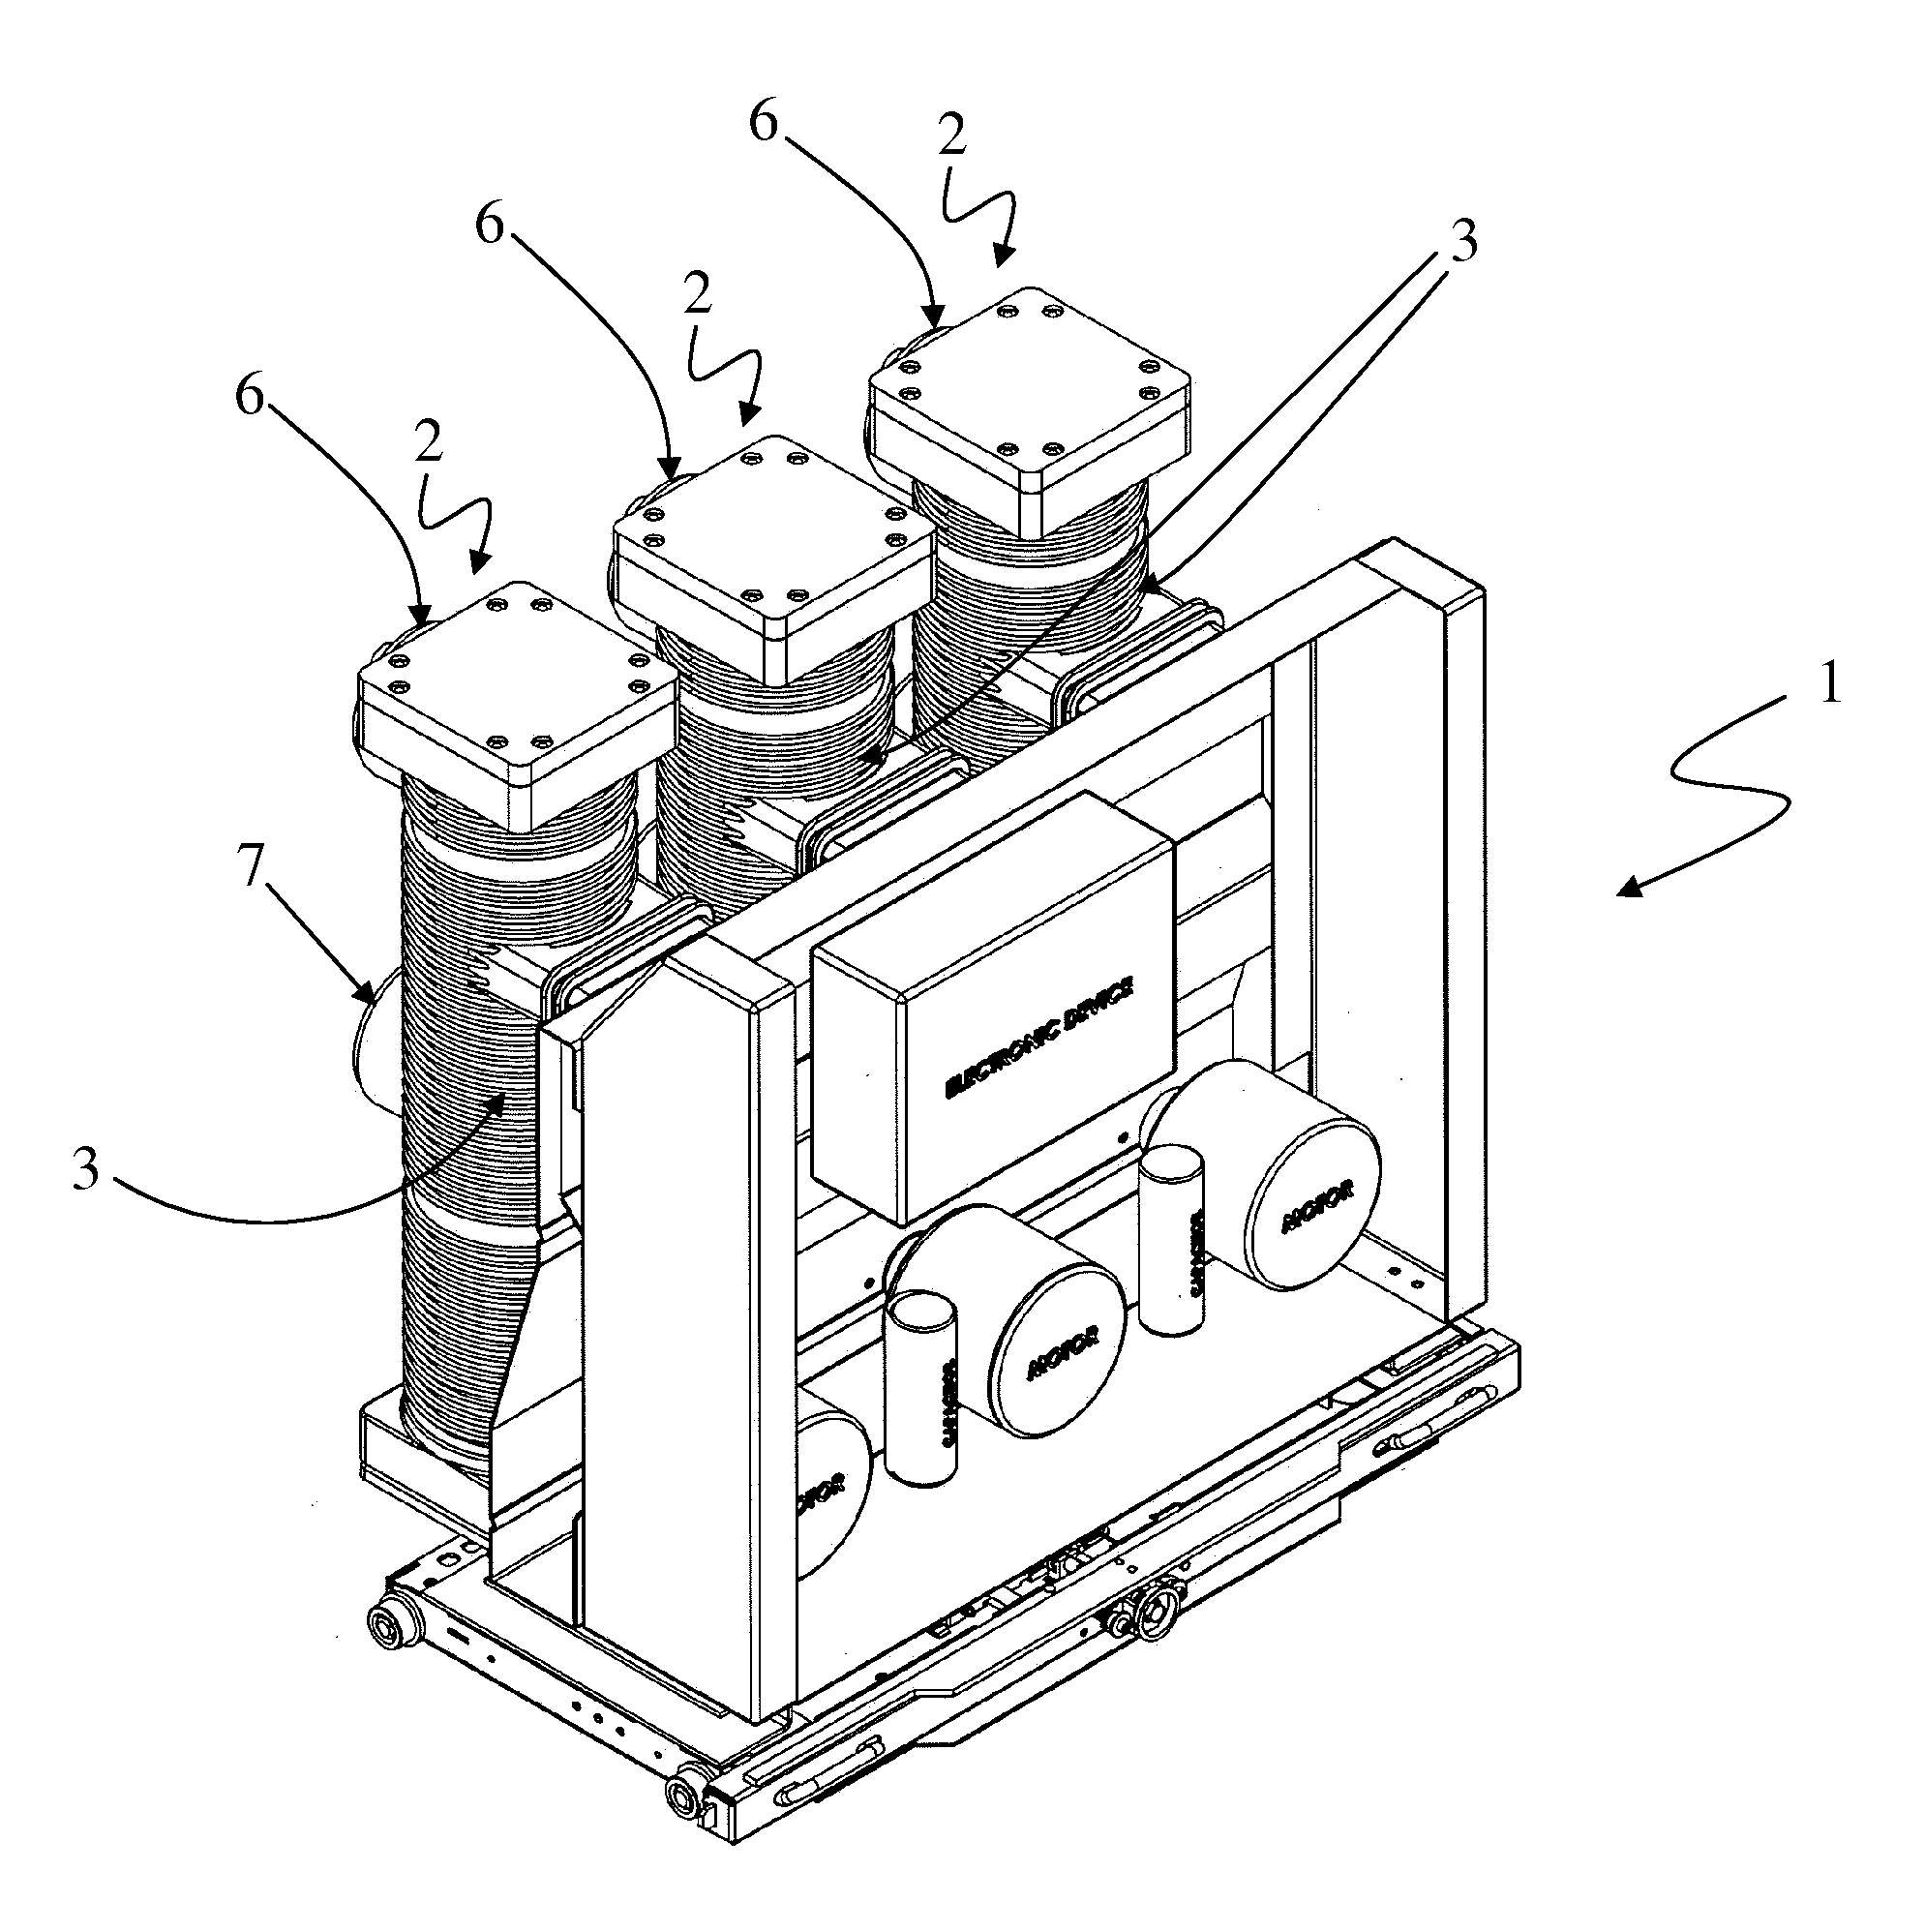 Switching device and related switchgear